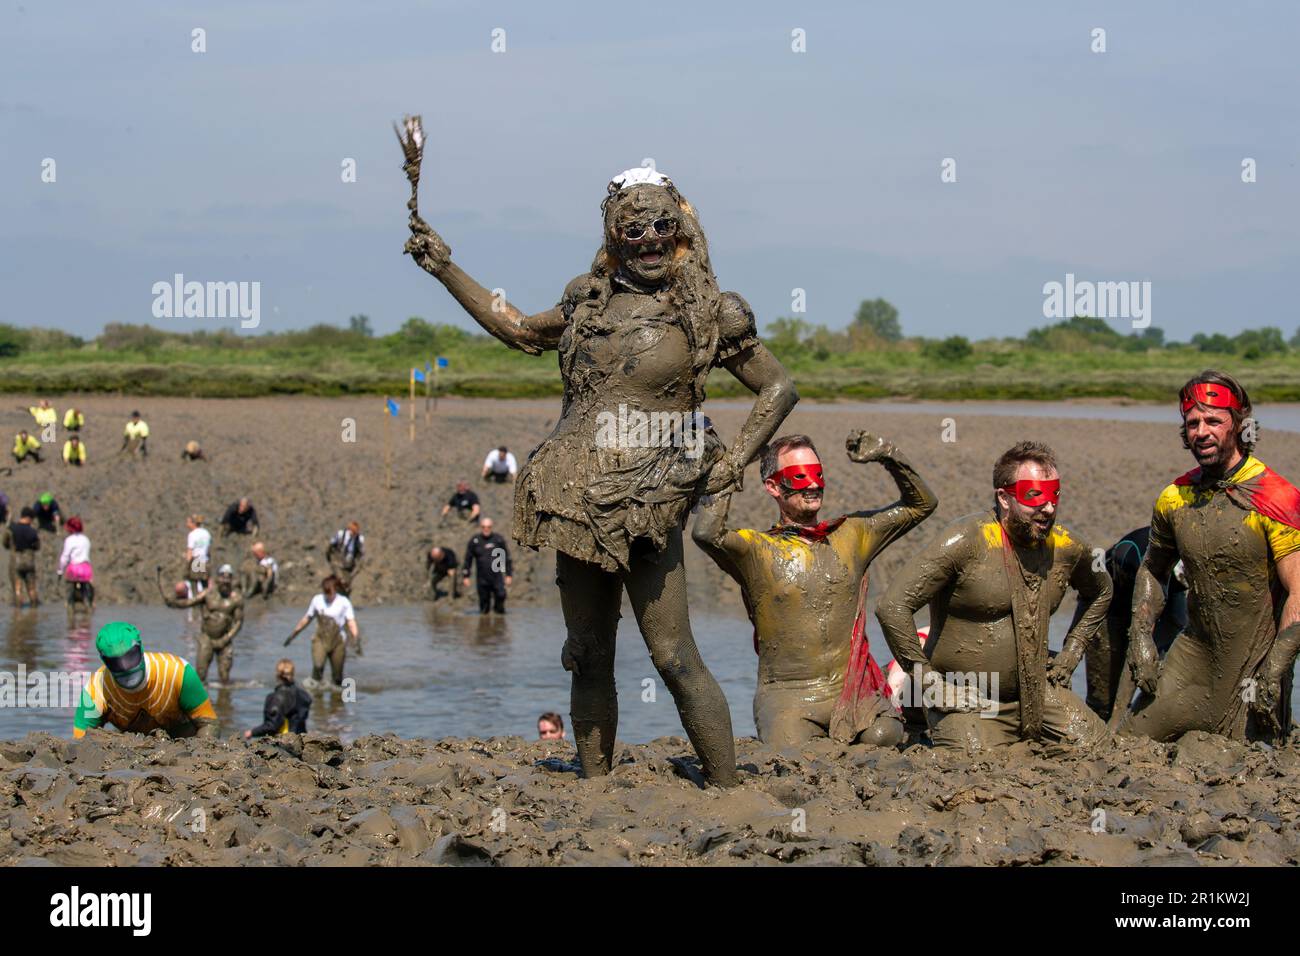 Maldon, Essex, UK. 14th May 2023. Competitors take part in the Maldon Mud Race, The mud race consists of a 500 meters dash across the River Blackwater and dates back to 1973. Credit: Lucy North/Alamy Live News Stock Photo